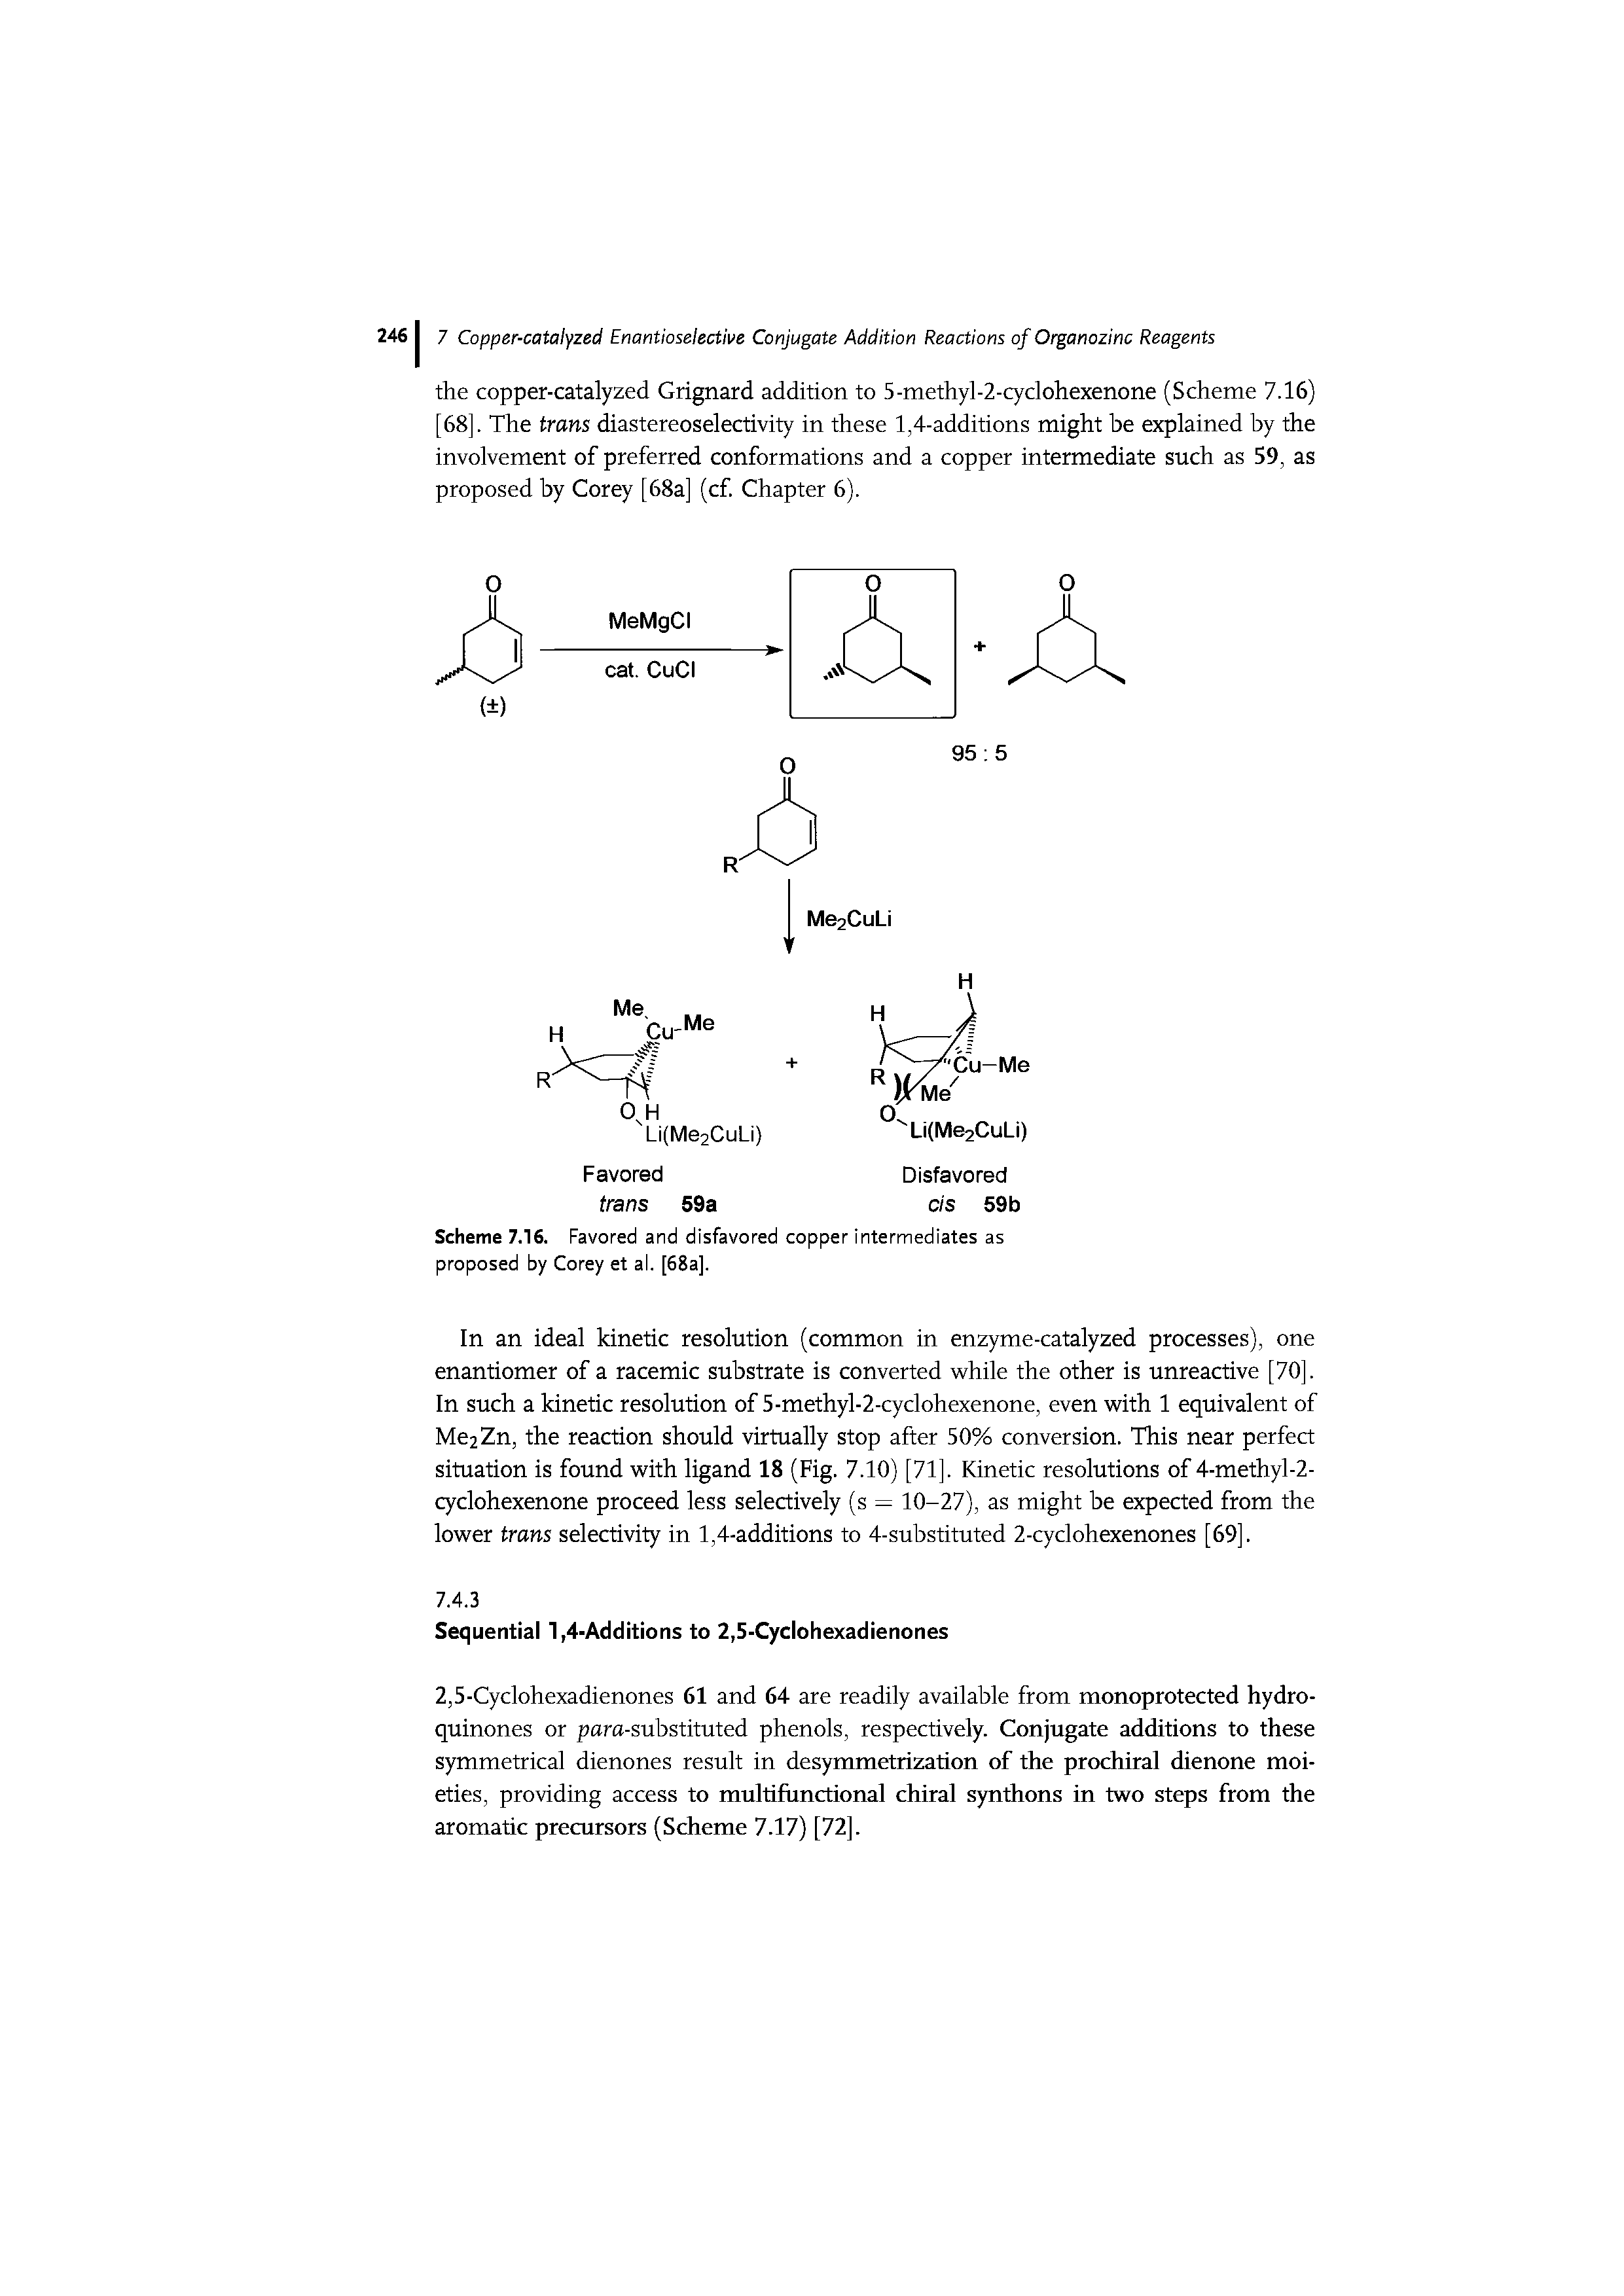 Scheme 7.16. Favored and disfavored copper intermediates as proposed by Corey et al. [68aj.